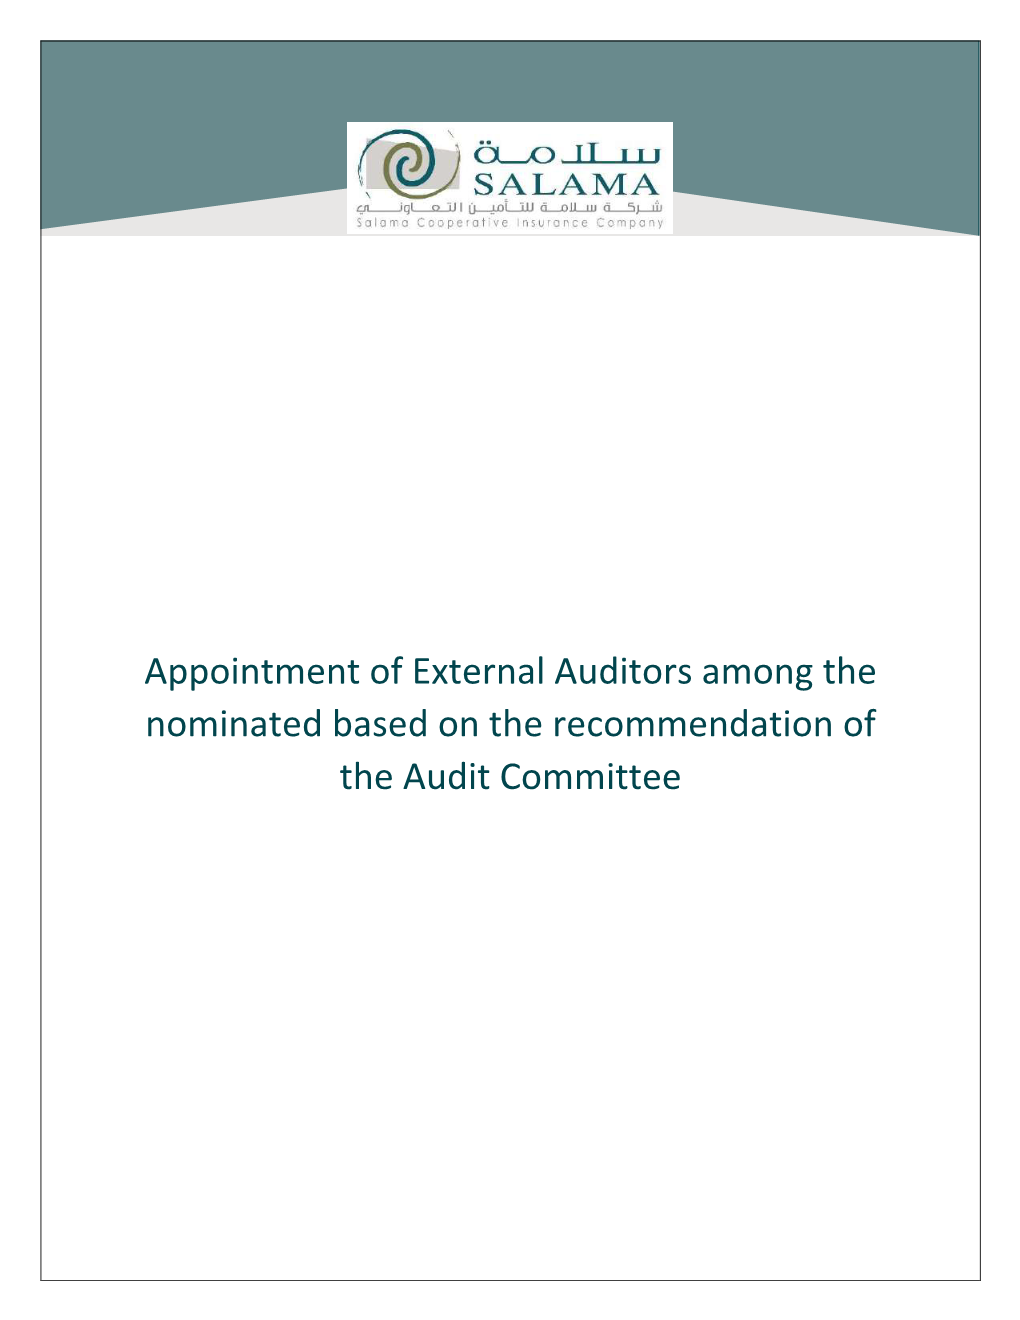 Appointment of External Auditors Among the Nominated Based on the Recommendation of the Audit Committee